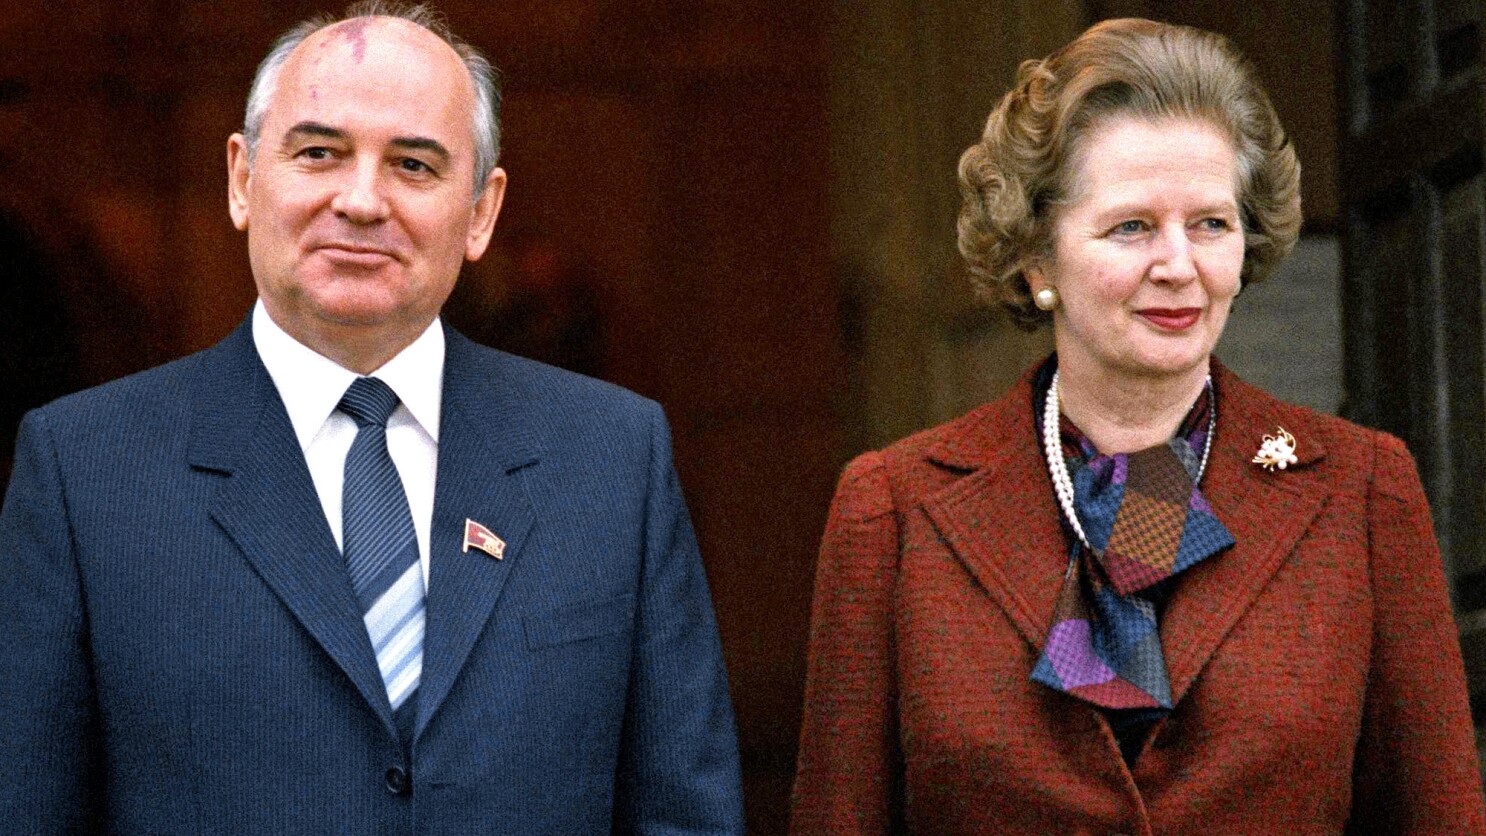 Mikhail Gorbachev has died, Soviet Union's last leader helped end Cold War  - Los Angeles Times